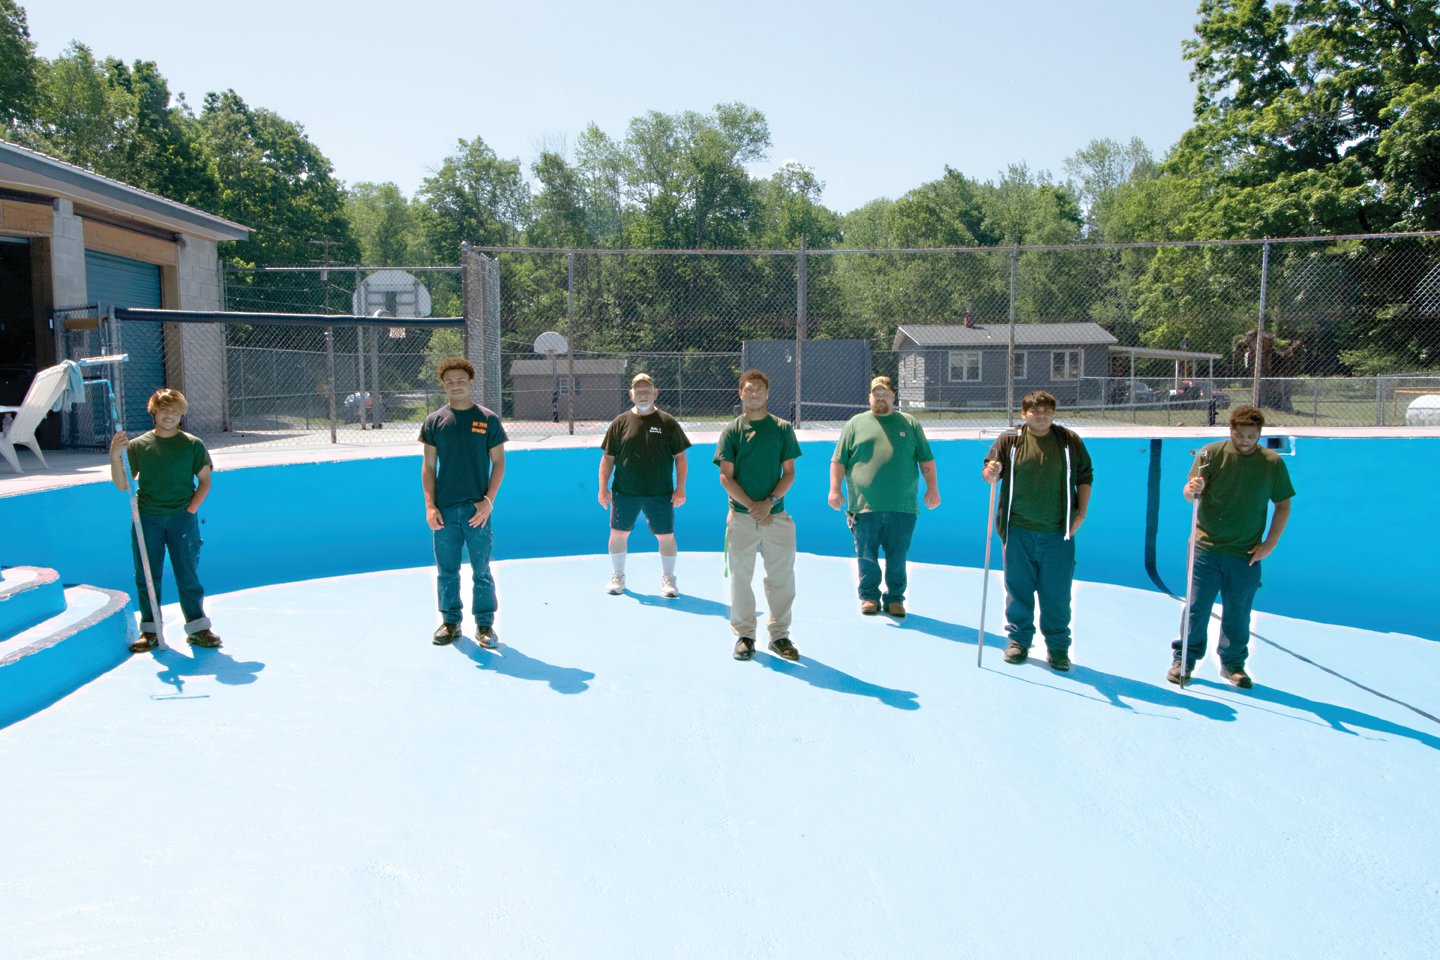 The Delaware Youth Center pool got a new paint job courtesy of (from left to right) Leo Chan, Emman Robinson, Facilities Coordinator Pete Lafleur, Jamir Craft-Diggs, Instructor Tom, Willemer Loja and Doile Peters.